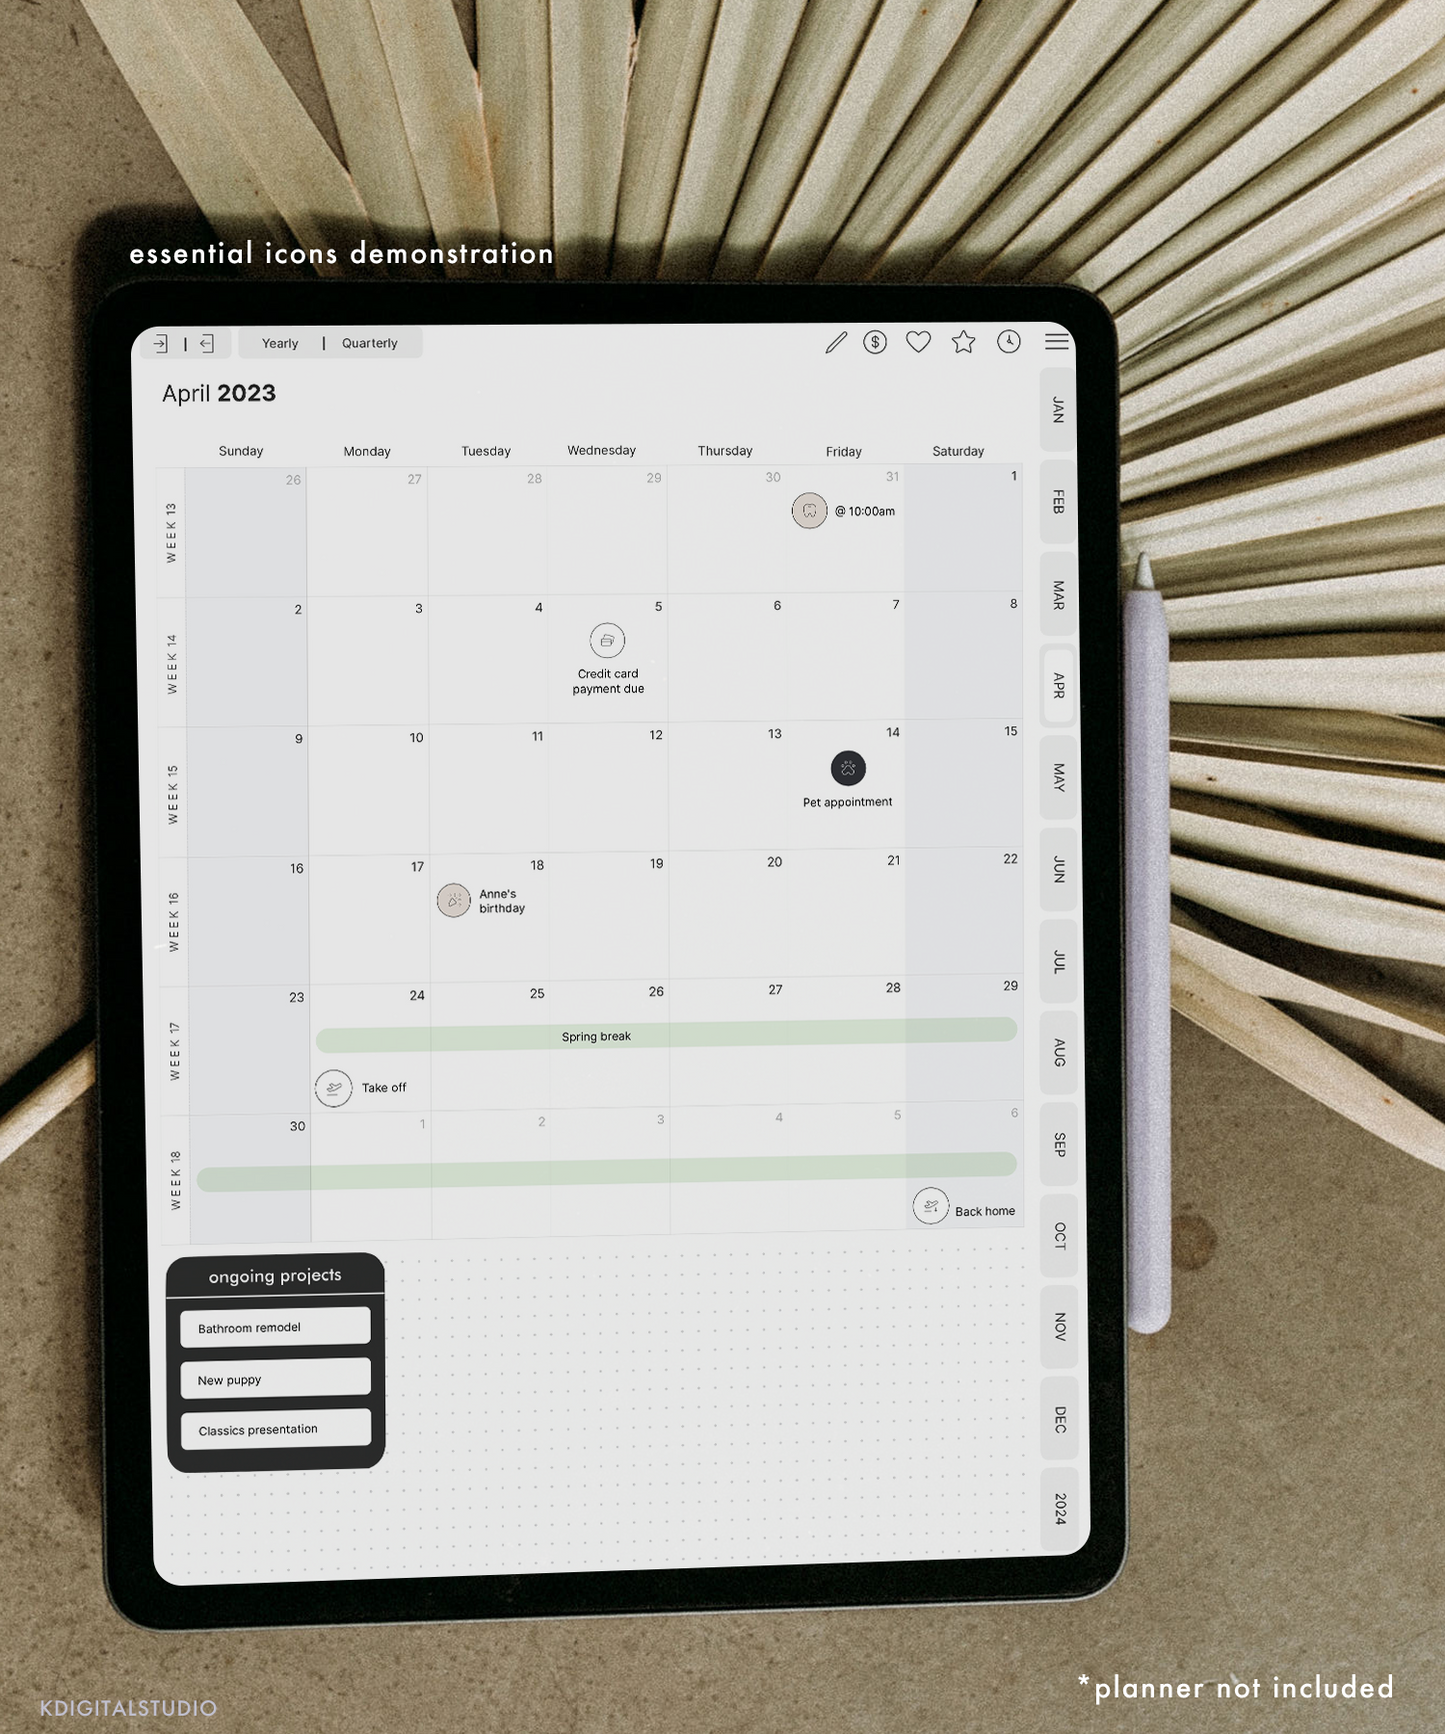 The essential icons stickers are meant for use in a digital planner inside apps like GoodNotes. The icon stickers come in white, black, and beige. Icons can be used in place of recurring tasks or to add flair to any digital planner.